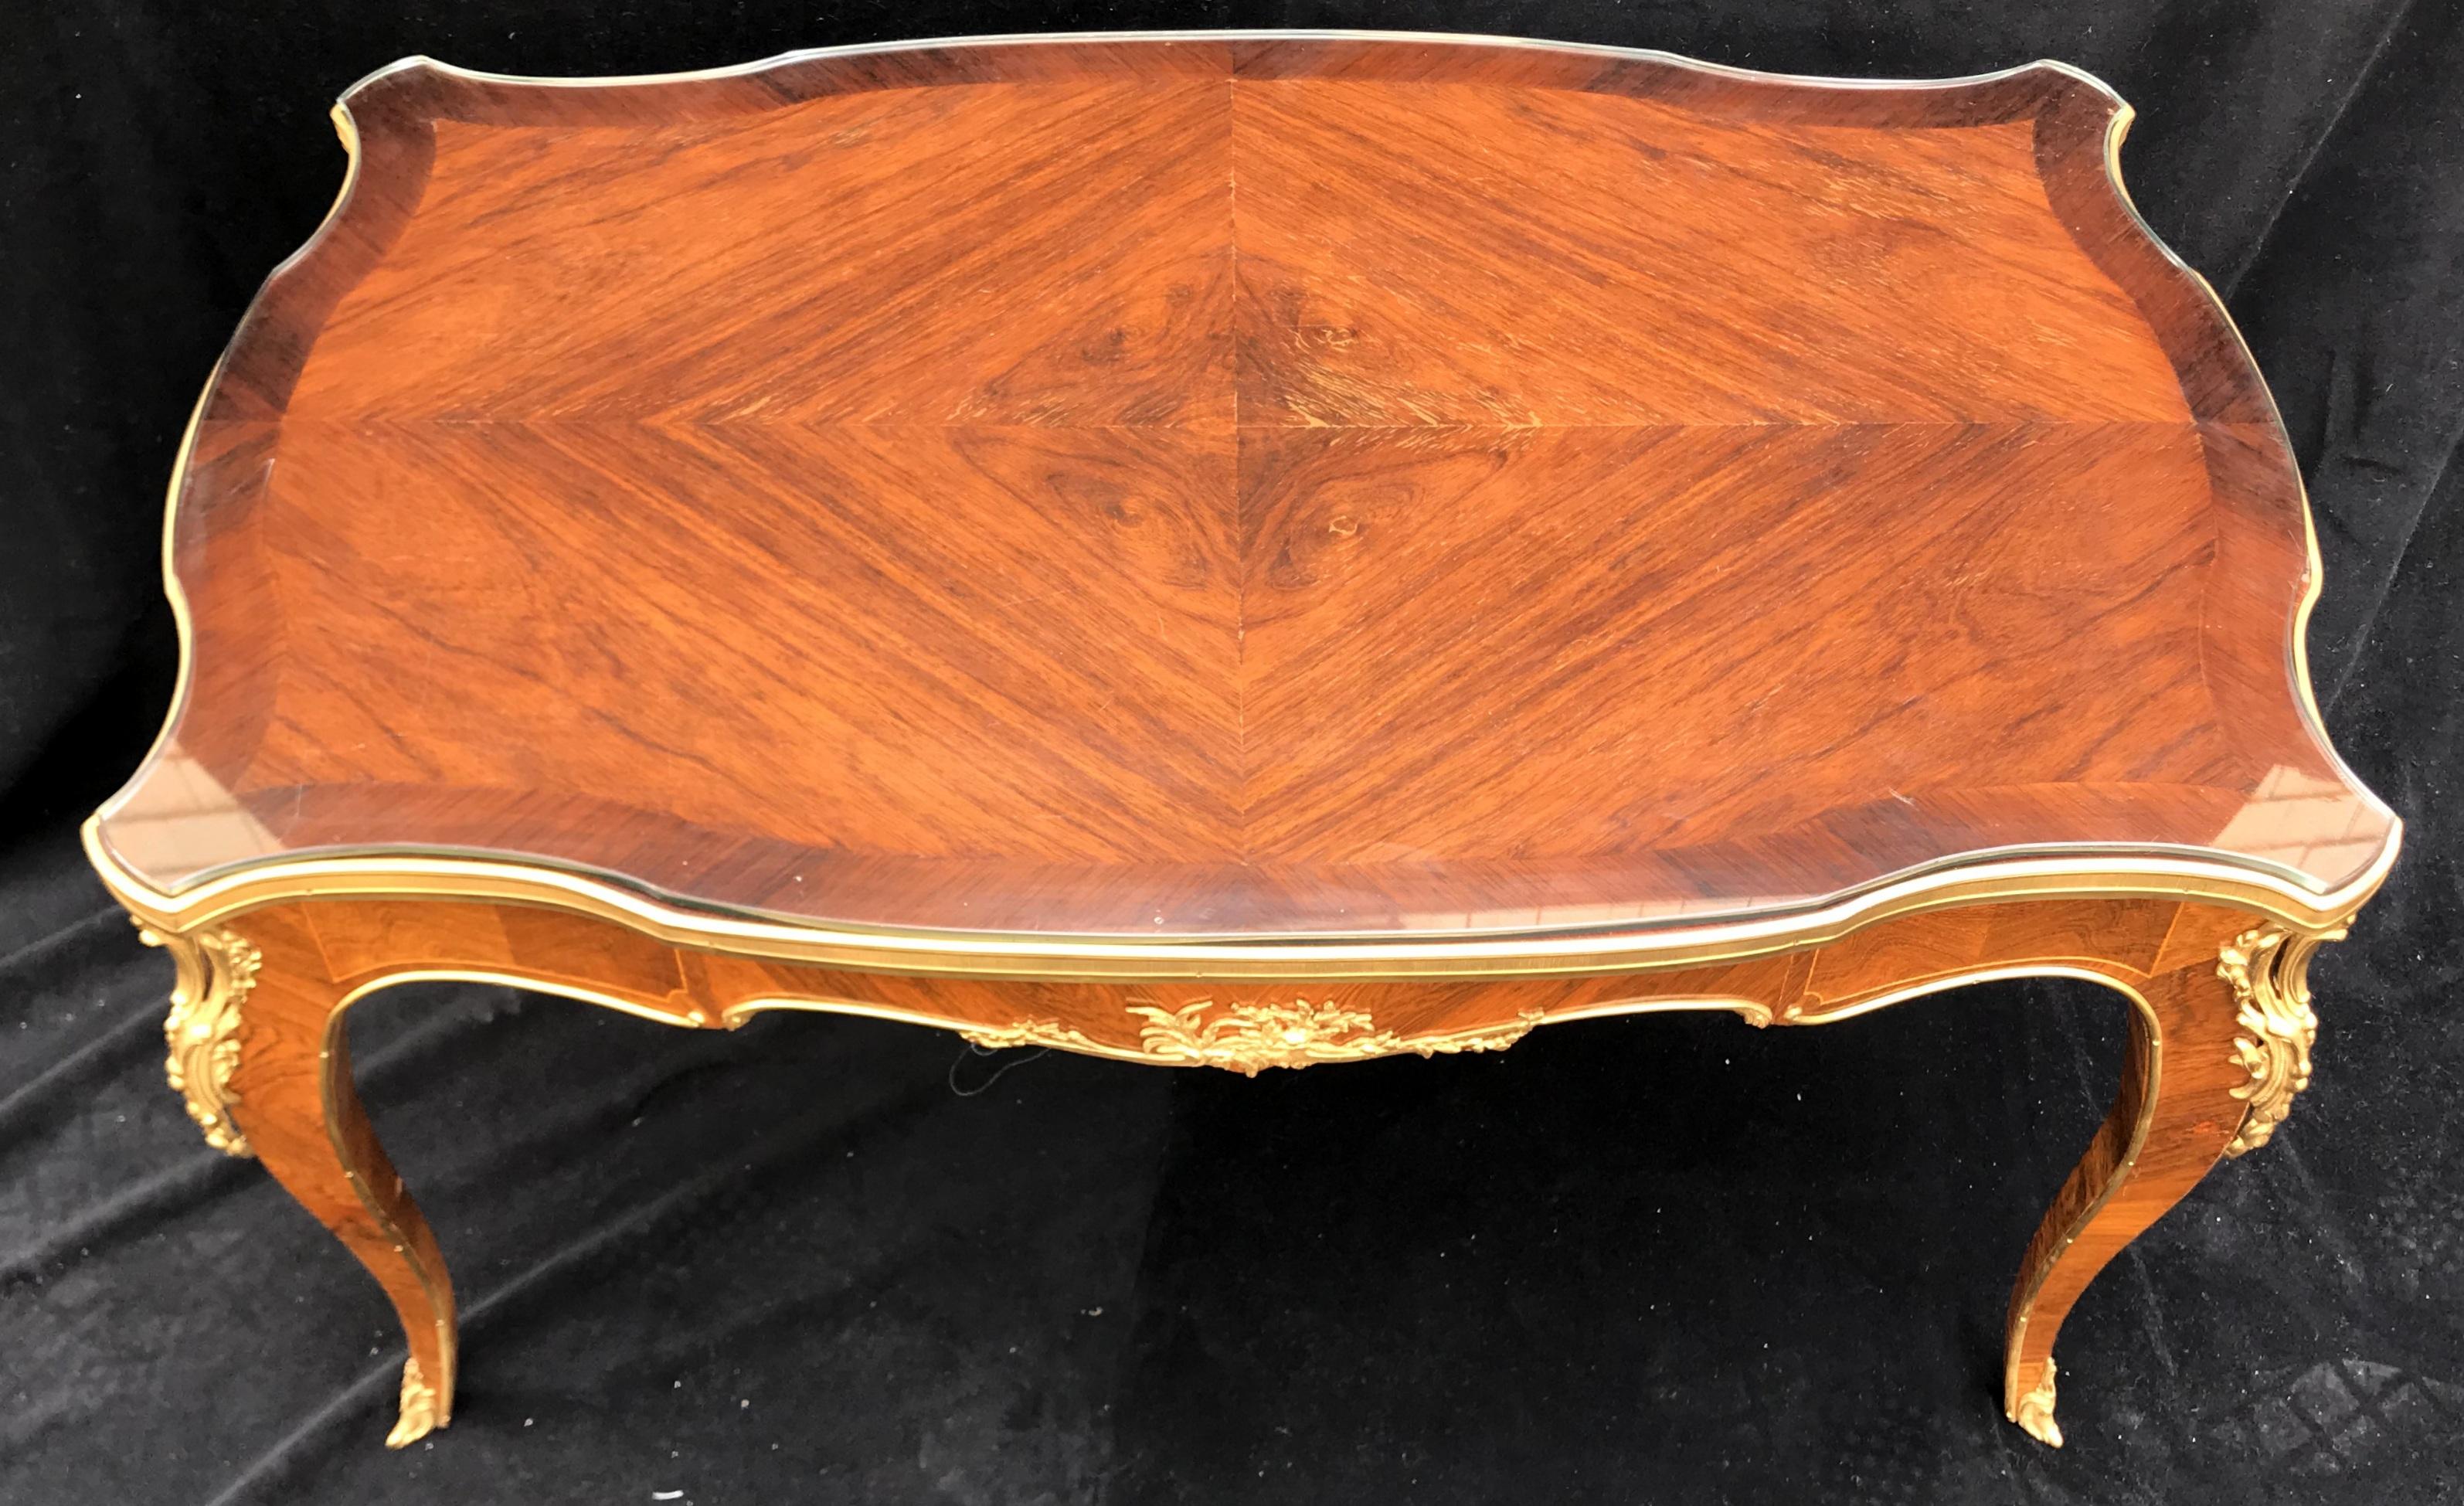 Wonderful French marquetry and bronze ormolu-mounted cocktail or coffee table with glass top.